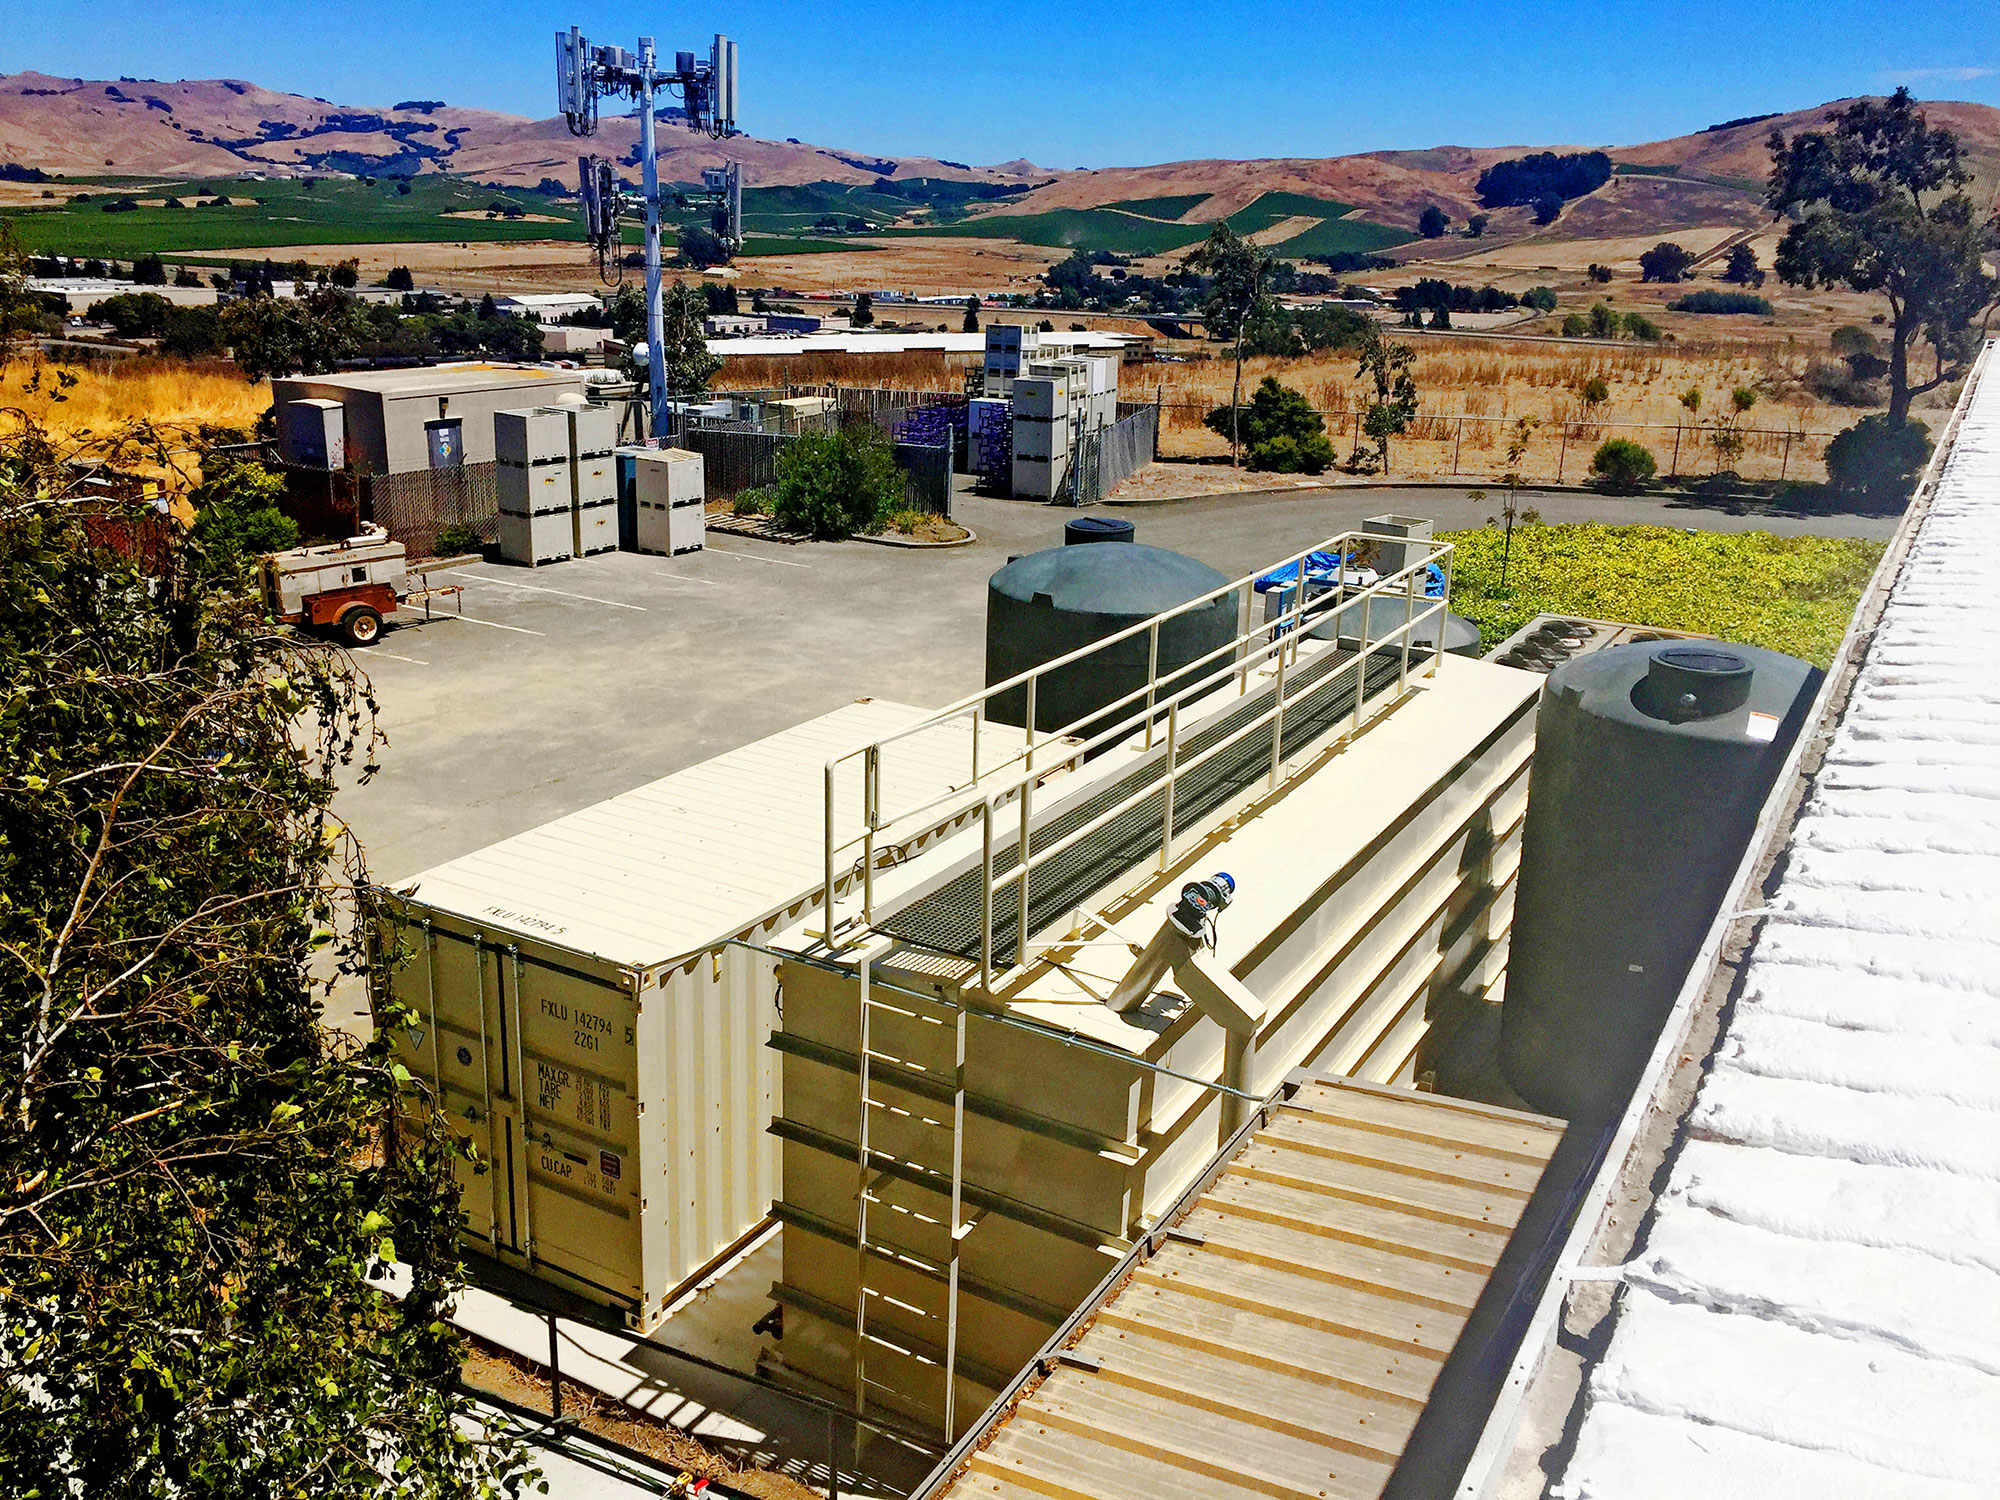  Application: MBR  Location: USA  Description: Treatment of winery wastewater in California  